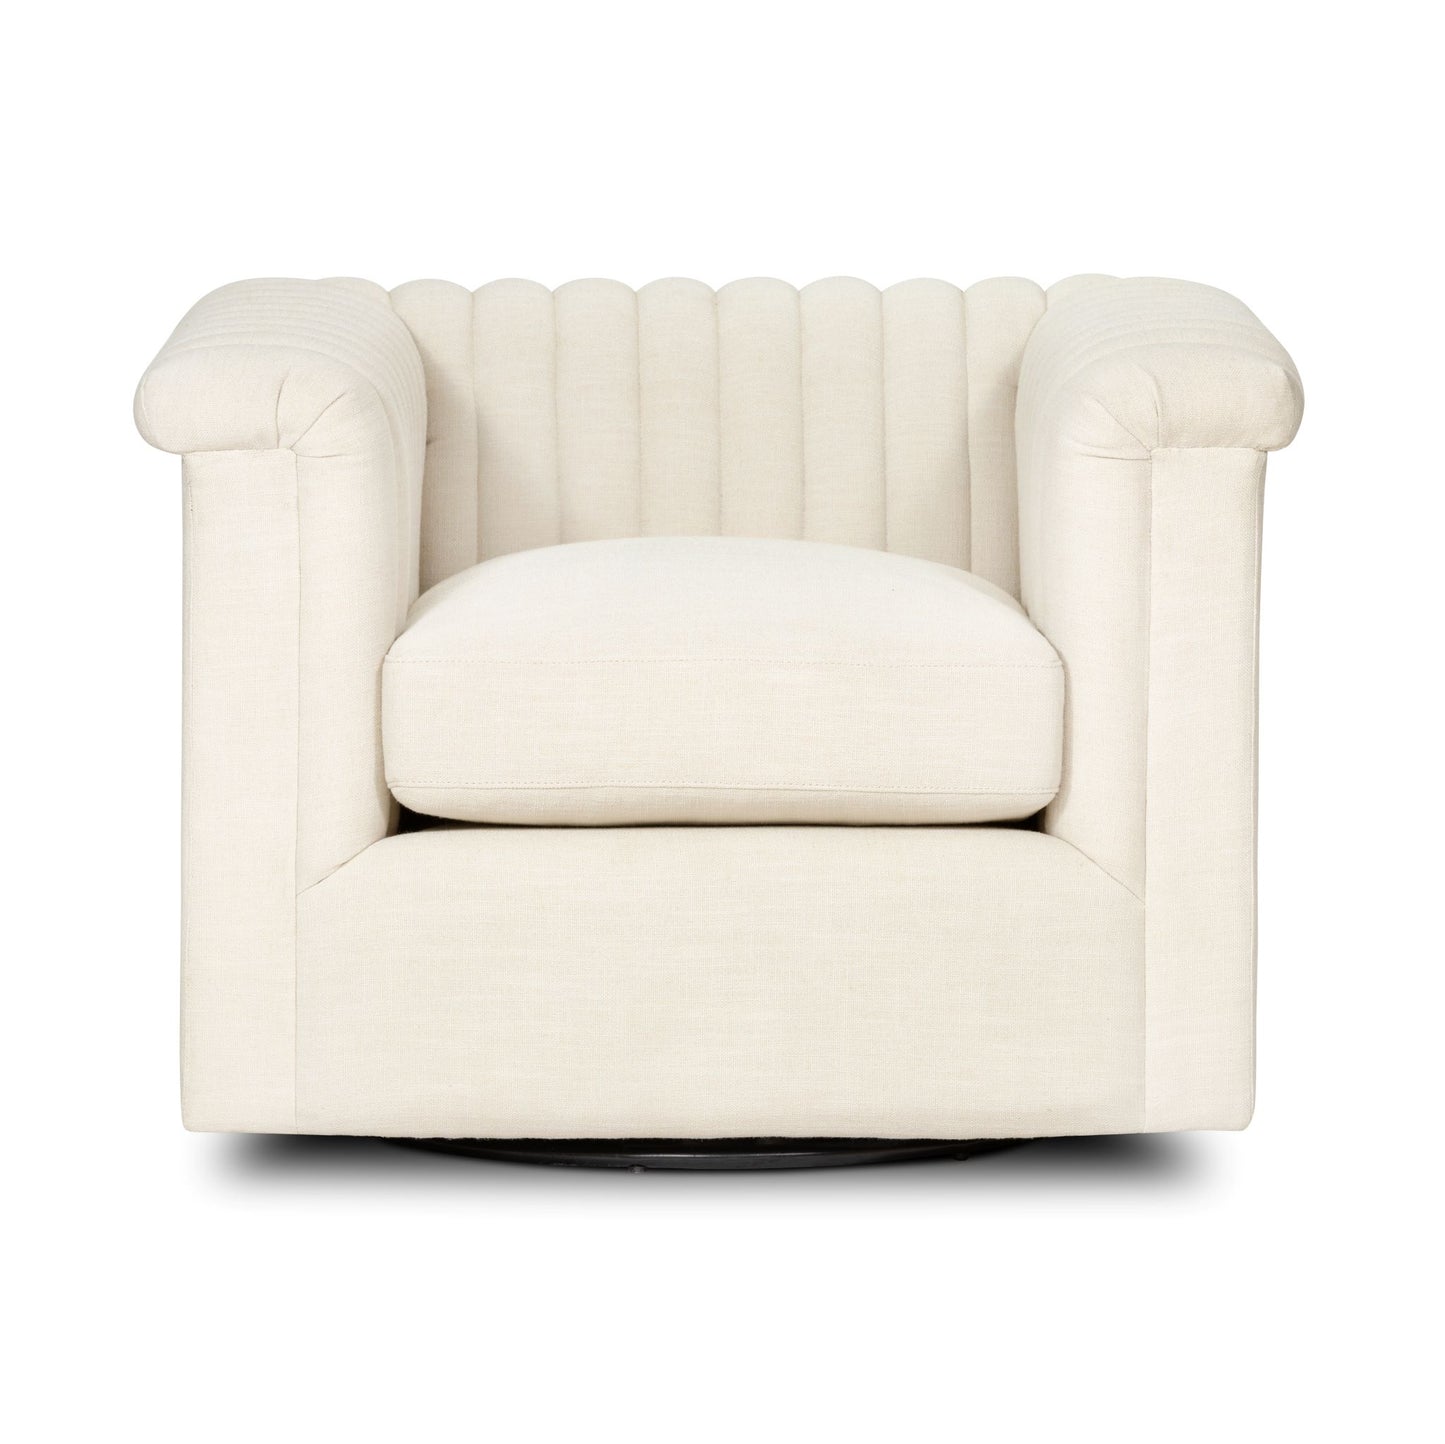 Watson Swivel Chair-Cambric Ivory Swivel Chair Four Hands     Four Hands, Mid Century Modern Furniture, Old Bones Furniture Company, Old Bones Co, Modern Mid Century, Designer Furniture, https://www.oldbonesco.com/